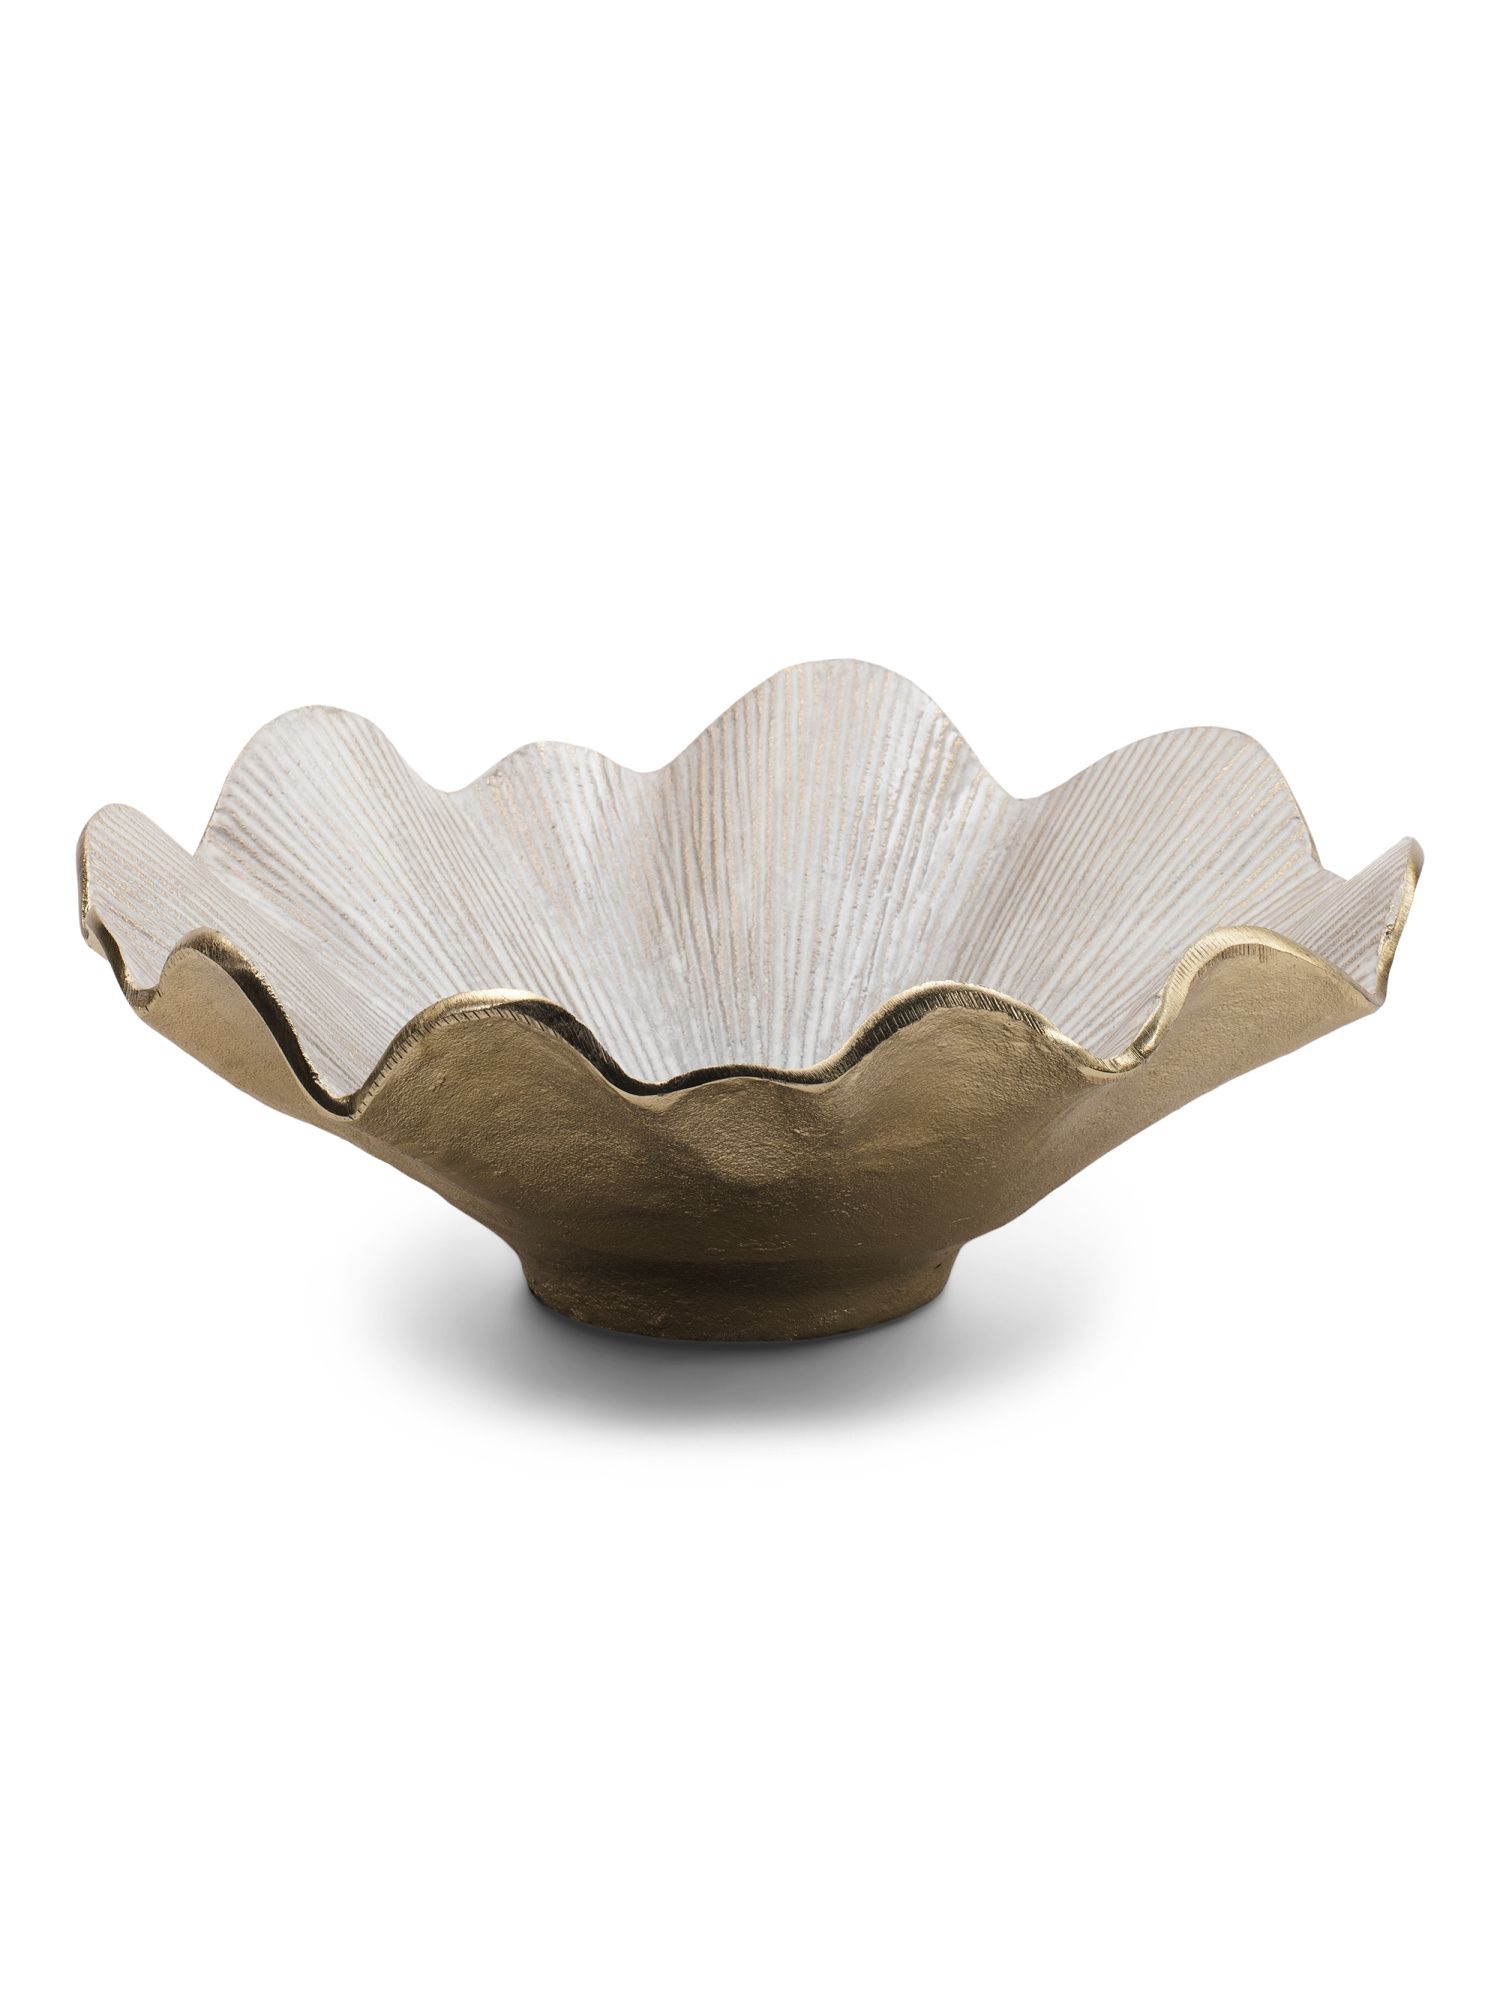 MADE IN INDIA
							
							14in Metal Organic Decorative Bowl
						
						
							

	
		
					... | Marshalls